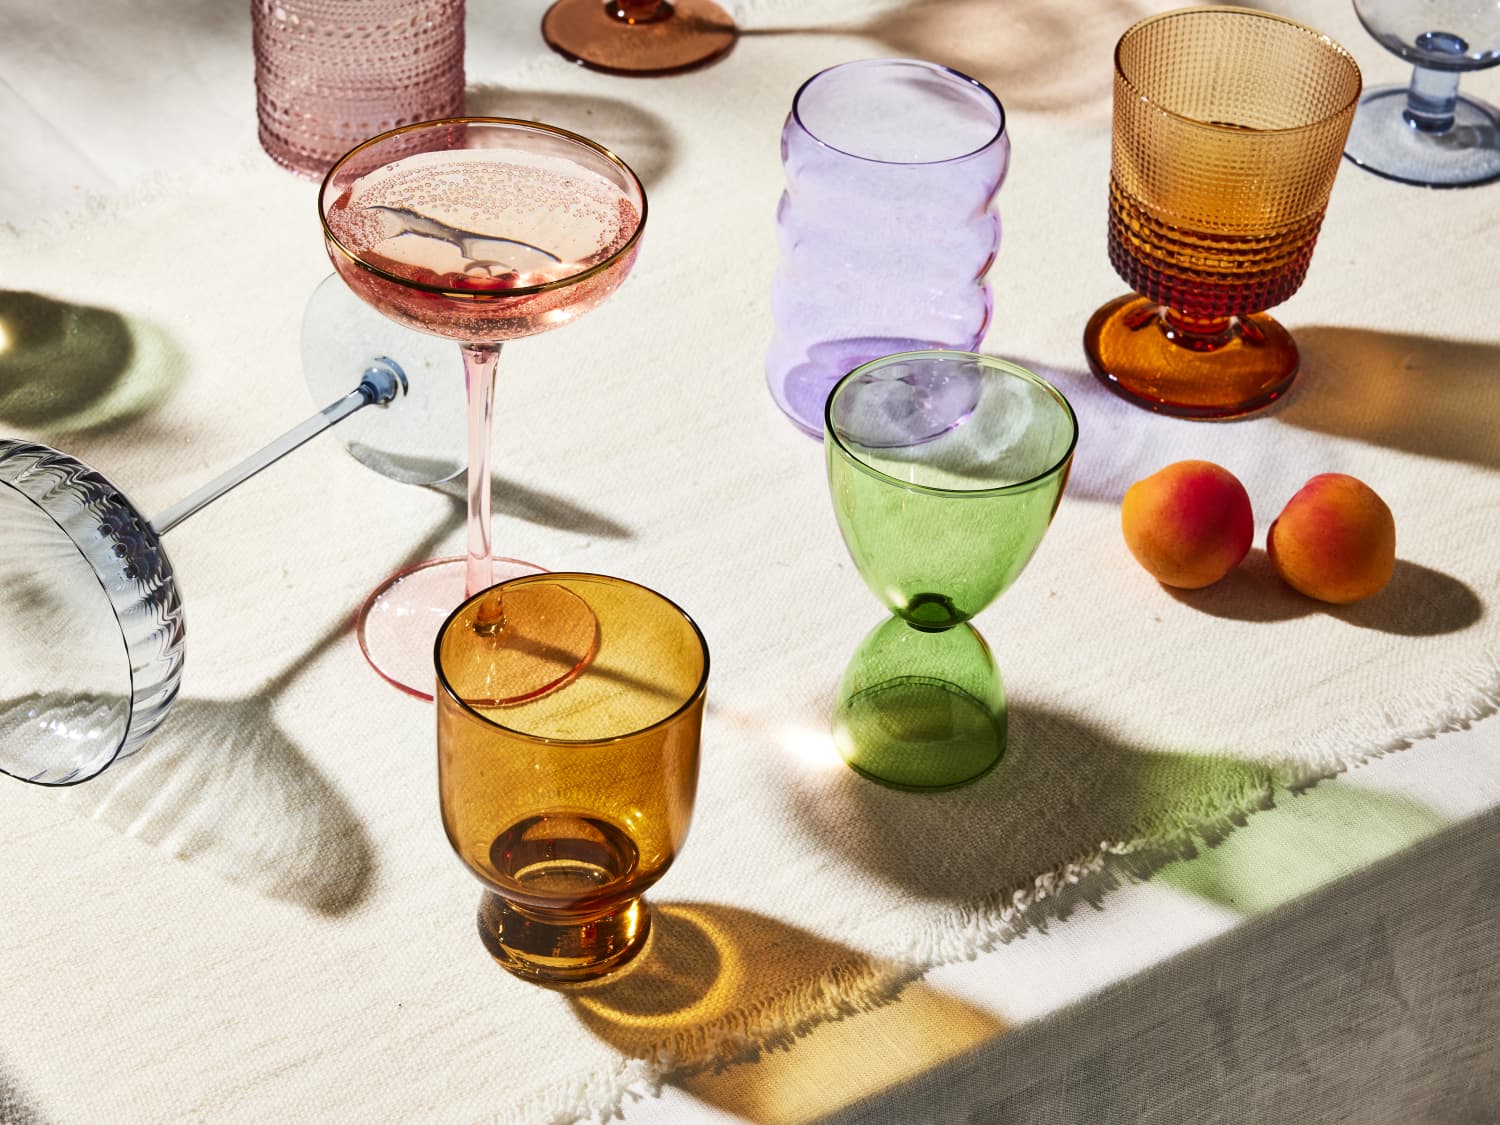 How to store glassware: 8 aesthetic and practical options